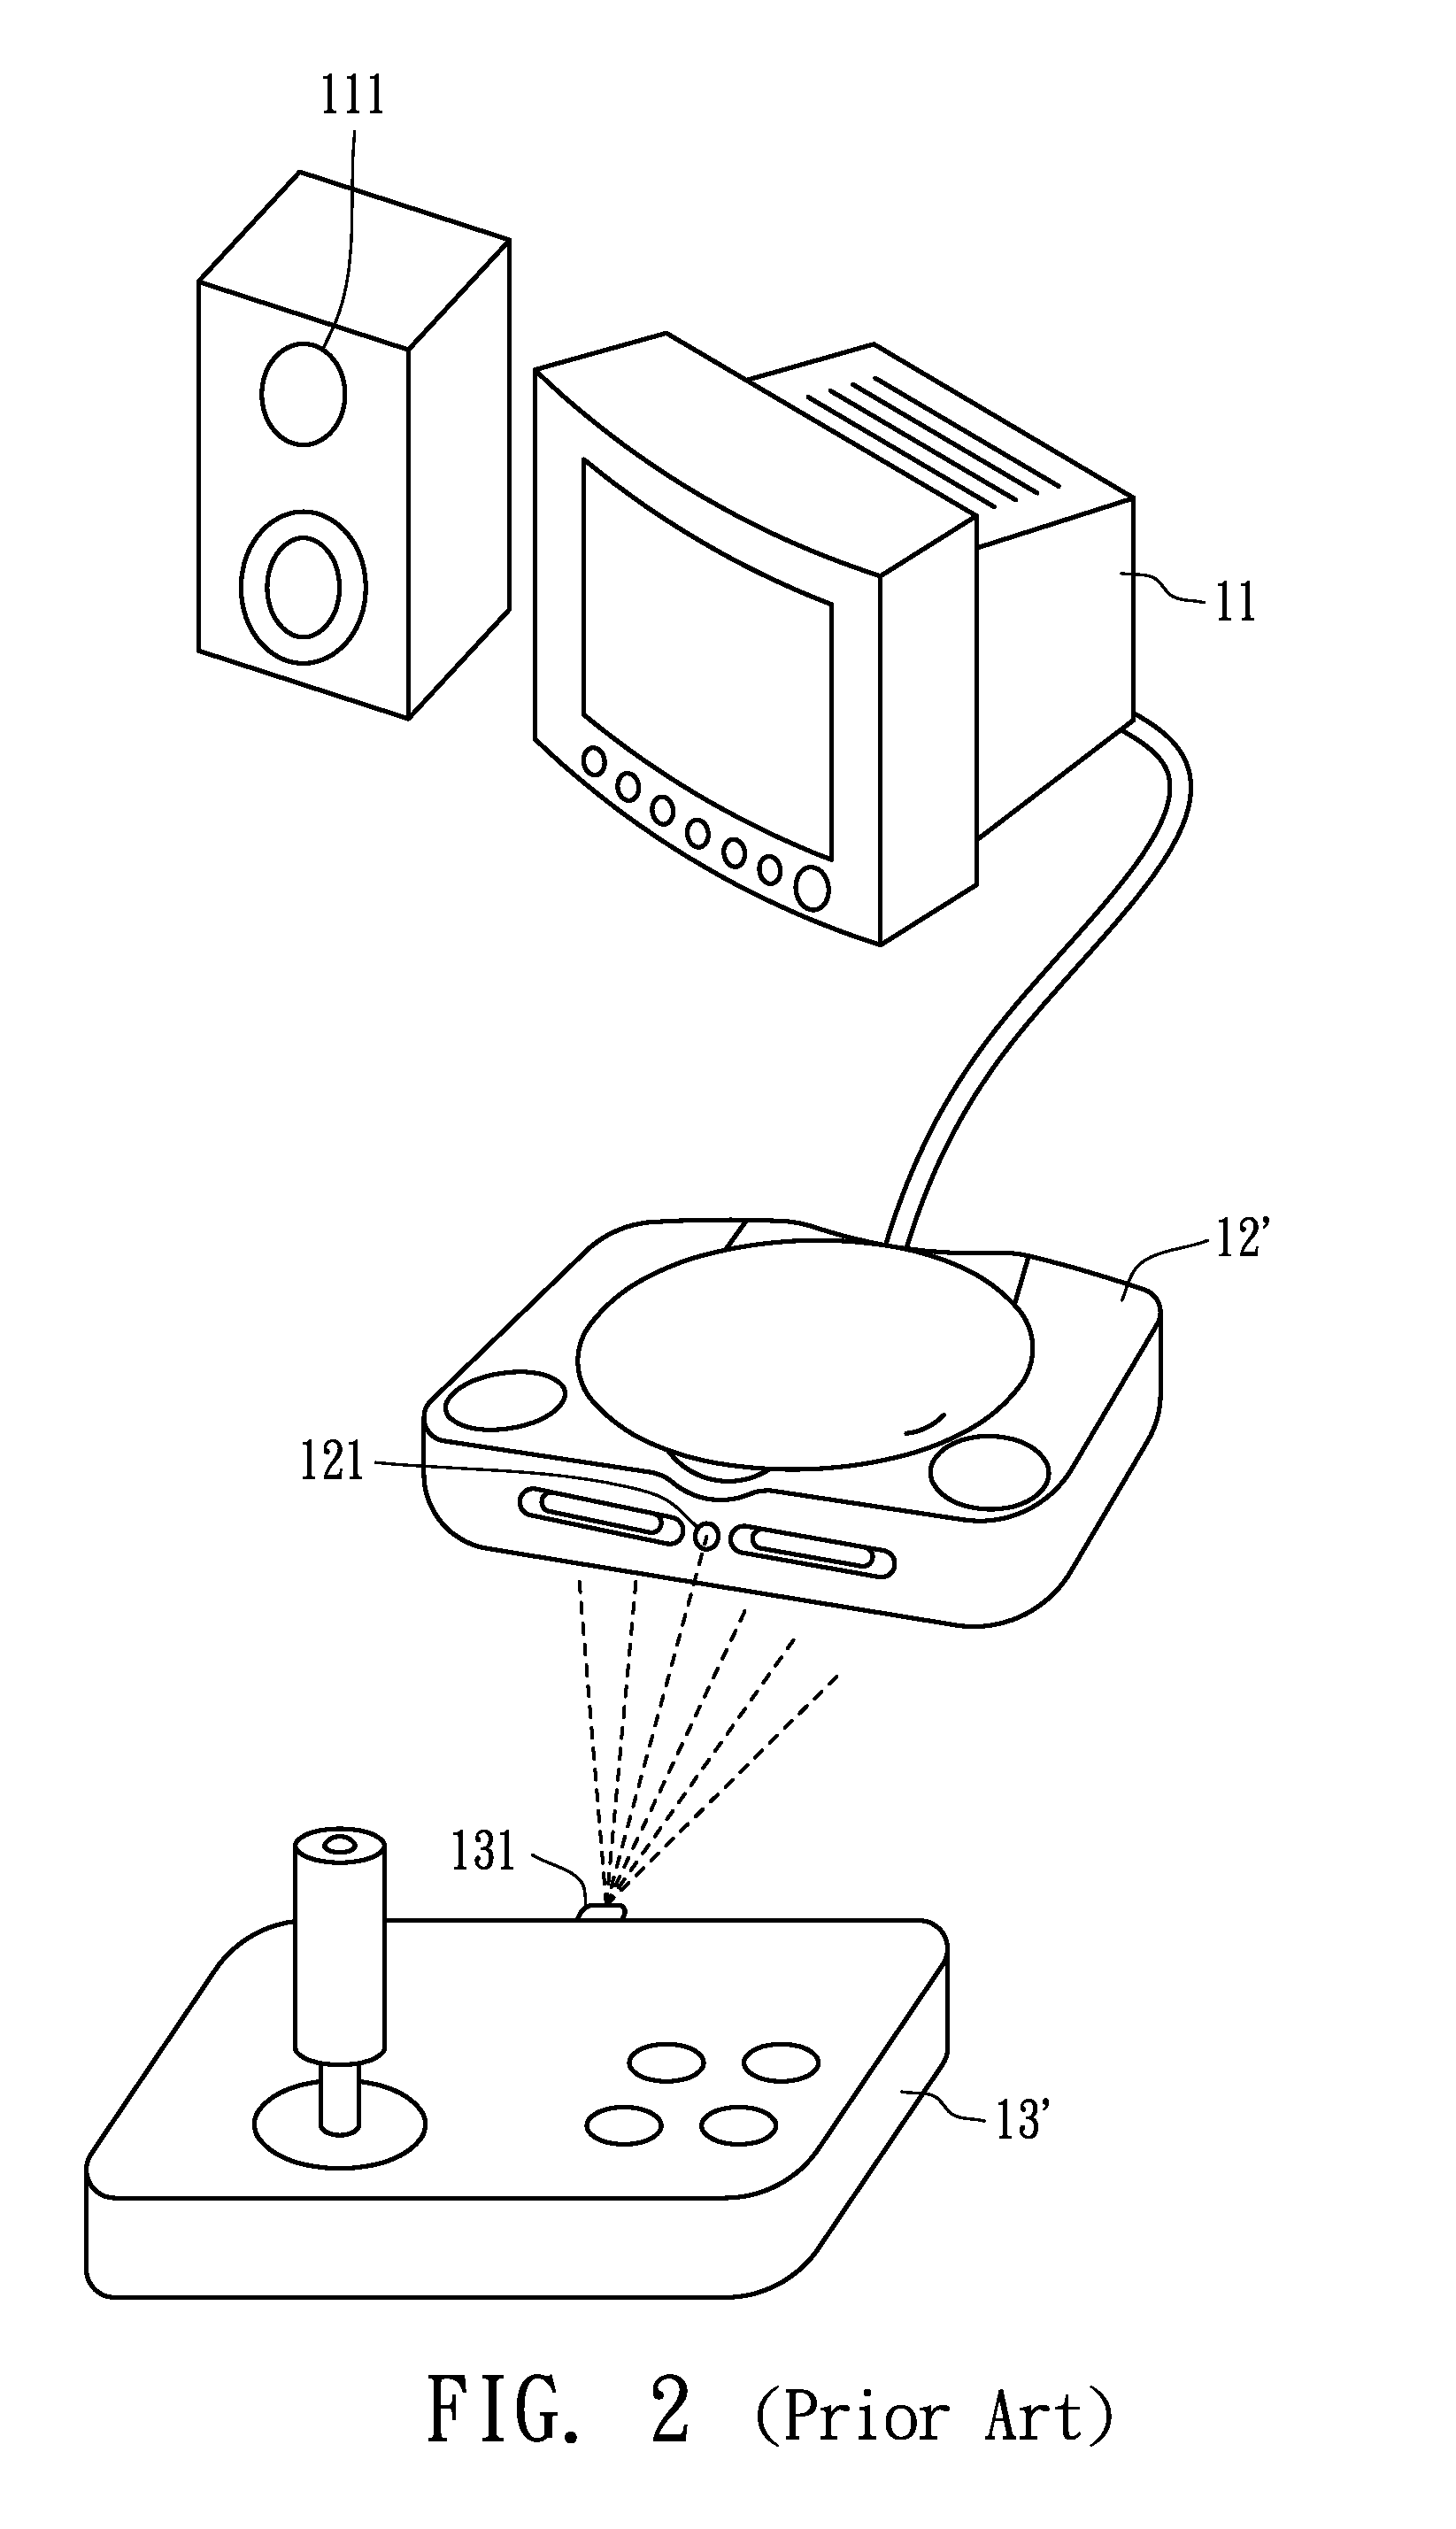 Interactive wireless game apparatus and wireless peripheral module